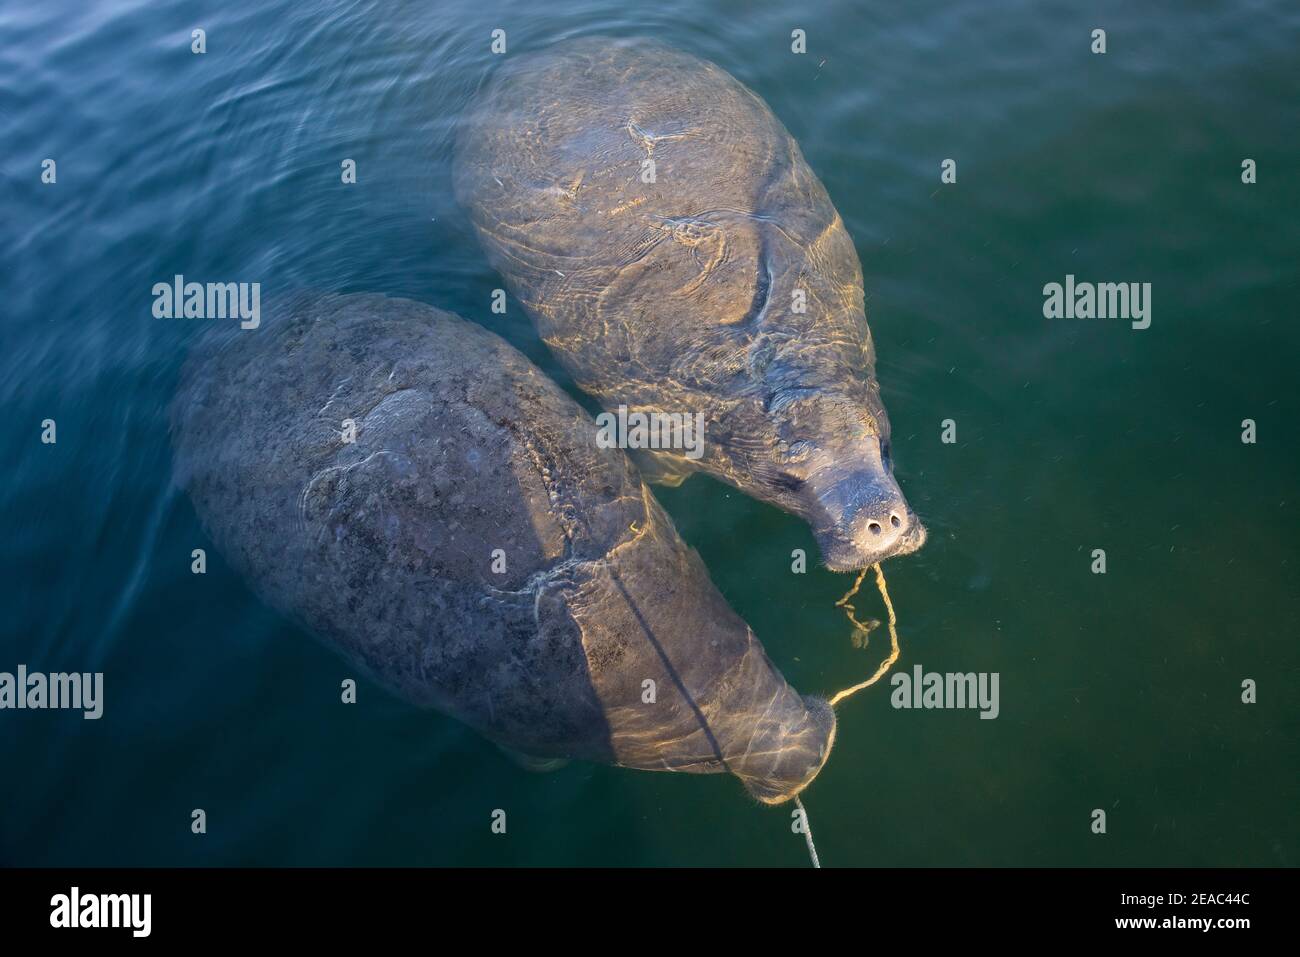 Florida manatees (Trichechus manatus latirostris) playing with anchor rope in their mouths, Kings Bay, Crystal River, Citrus County, Florida, USA Stock Photo